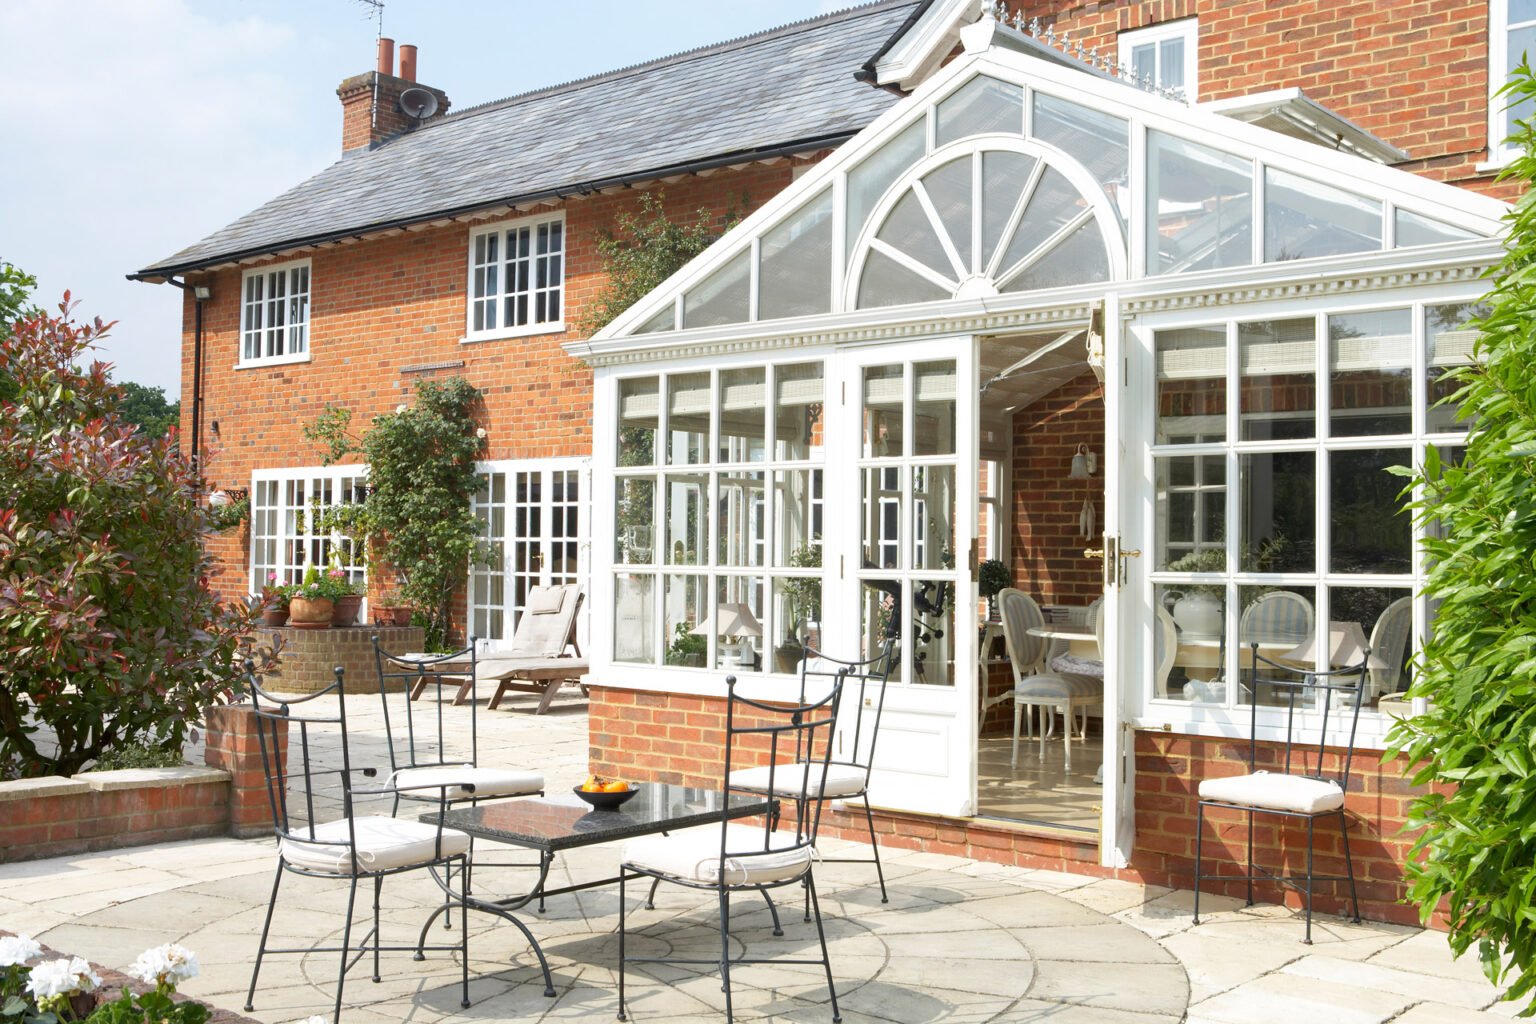 Orangery Extension Exterior - Indicative Only